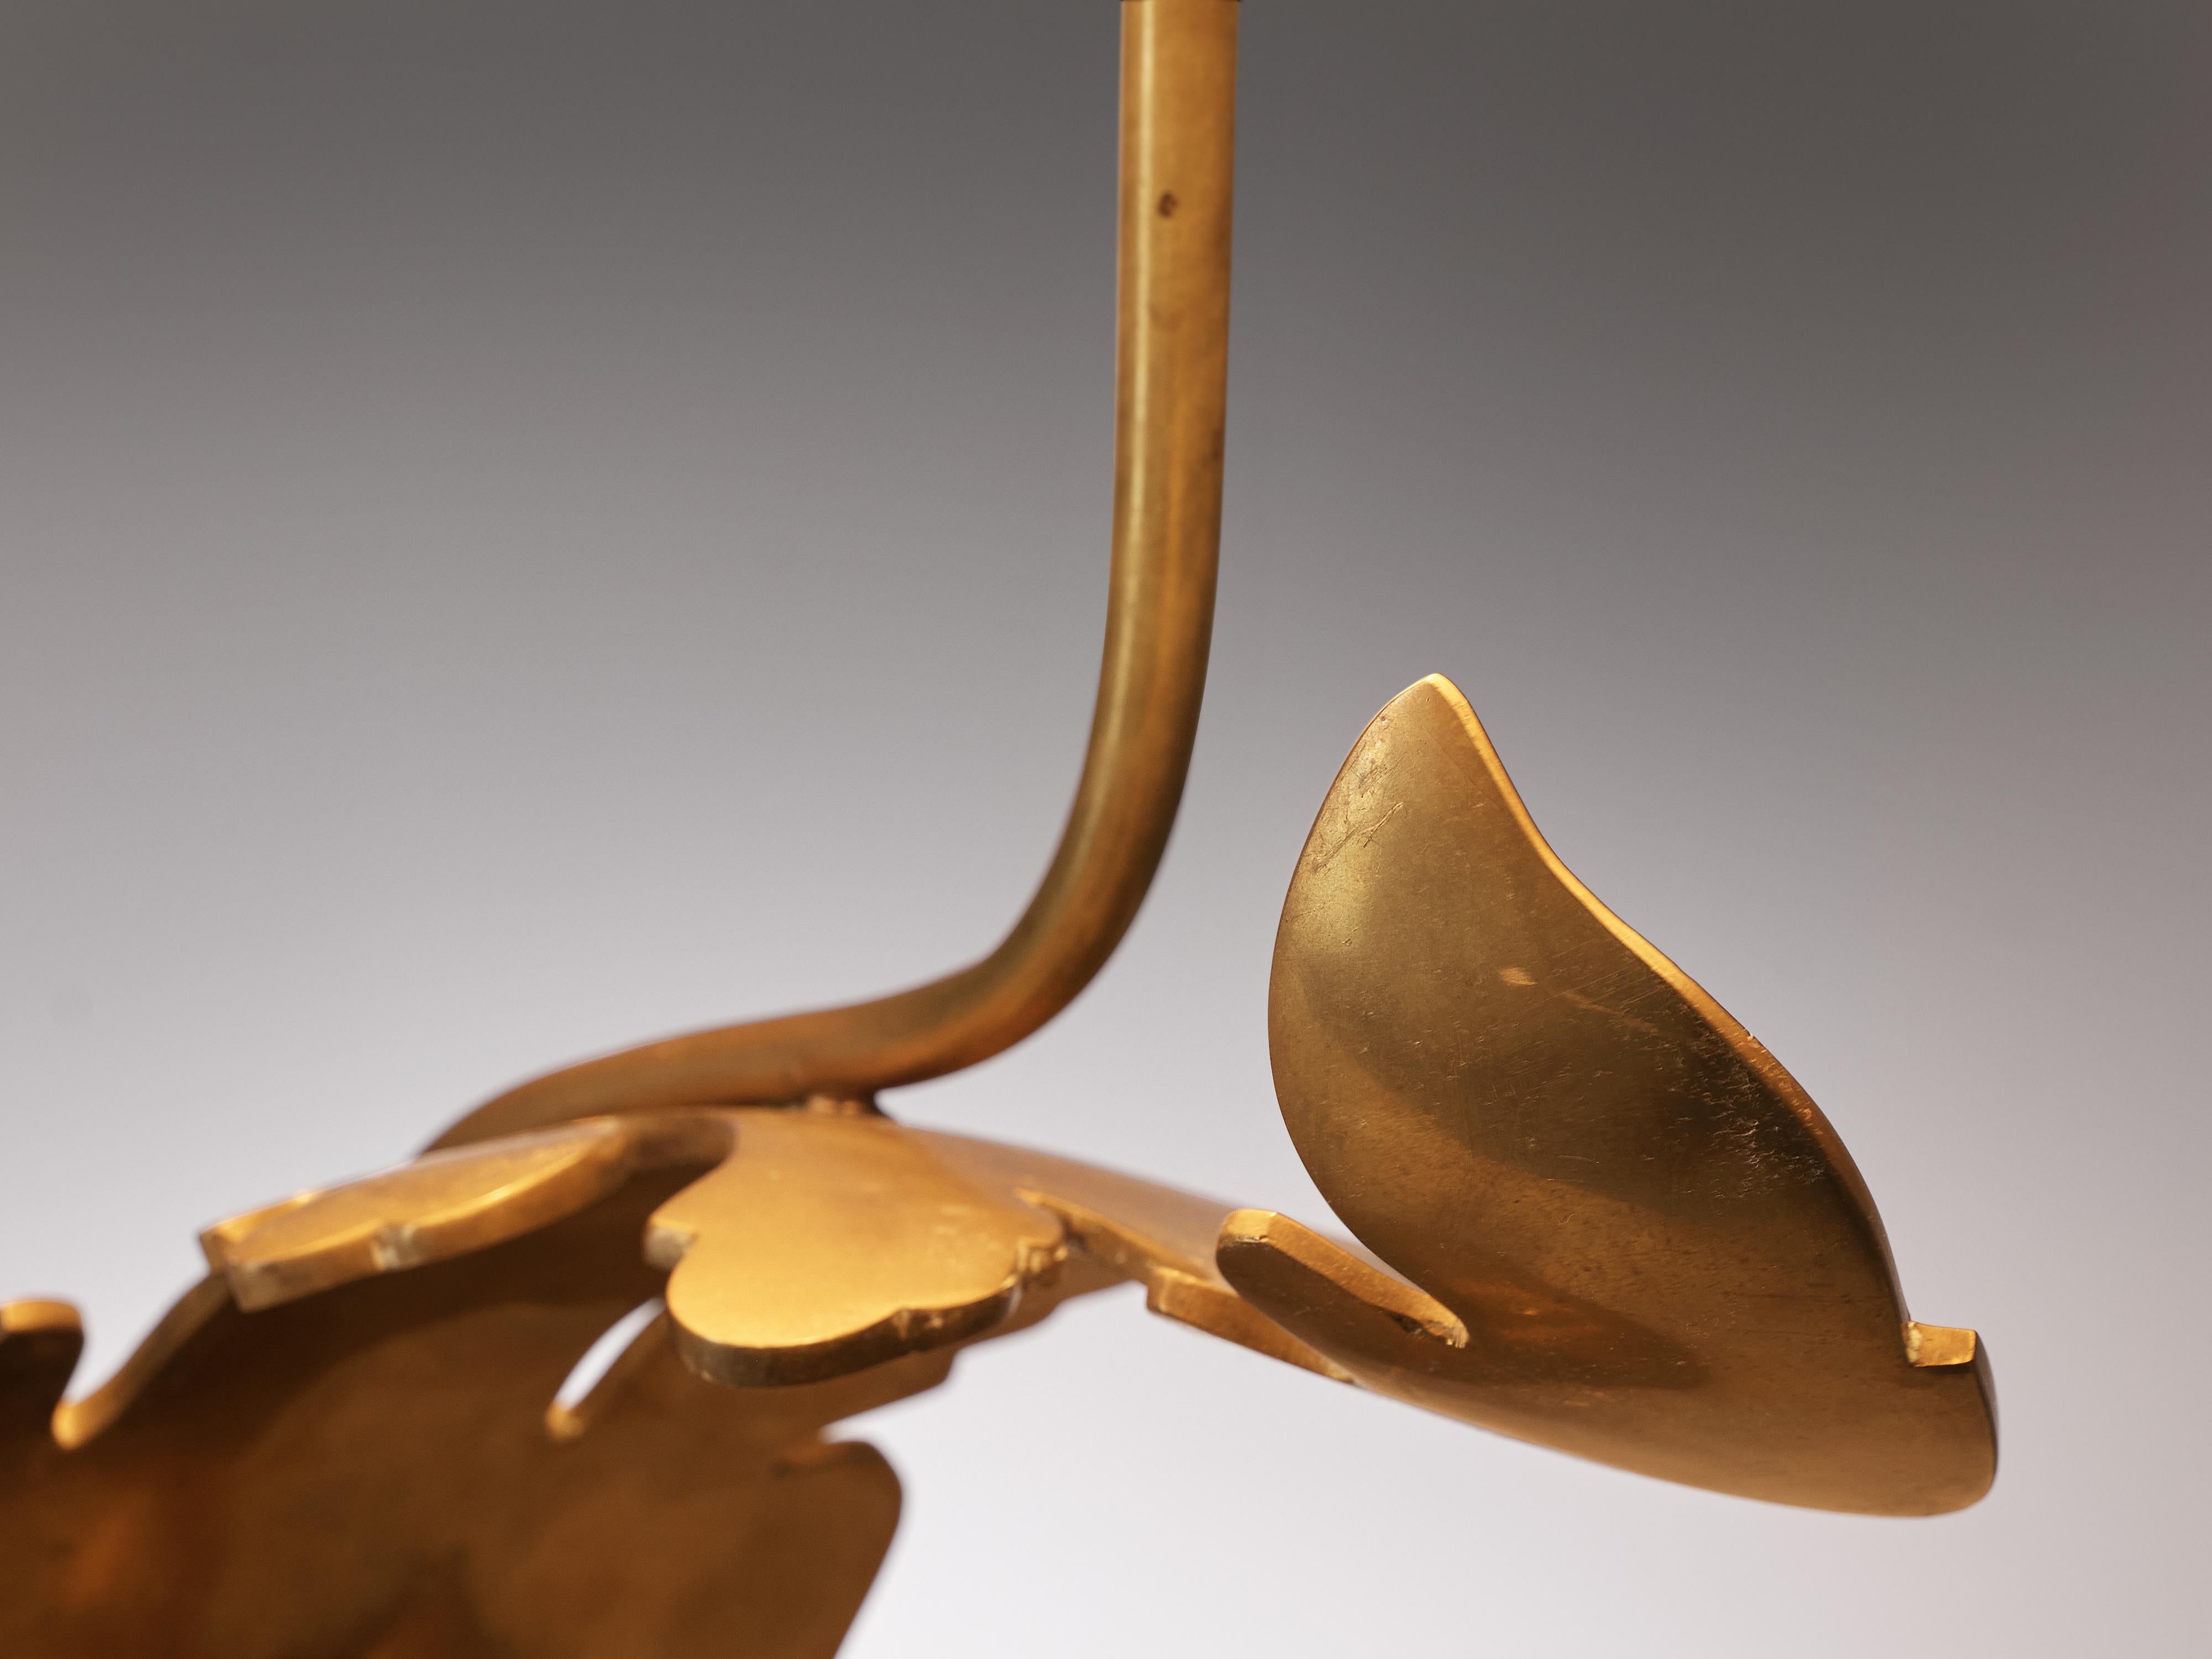 Table lamp, brass, fabric, France, 1970s

Rare and unique table lamp in brass. The very sculptural base forms an excellent combination with the color of the shade. Special about this lamp is the base that is formed in the shape of a leaf, giving